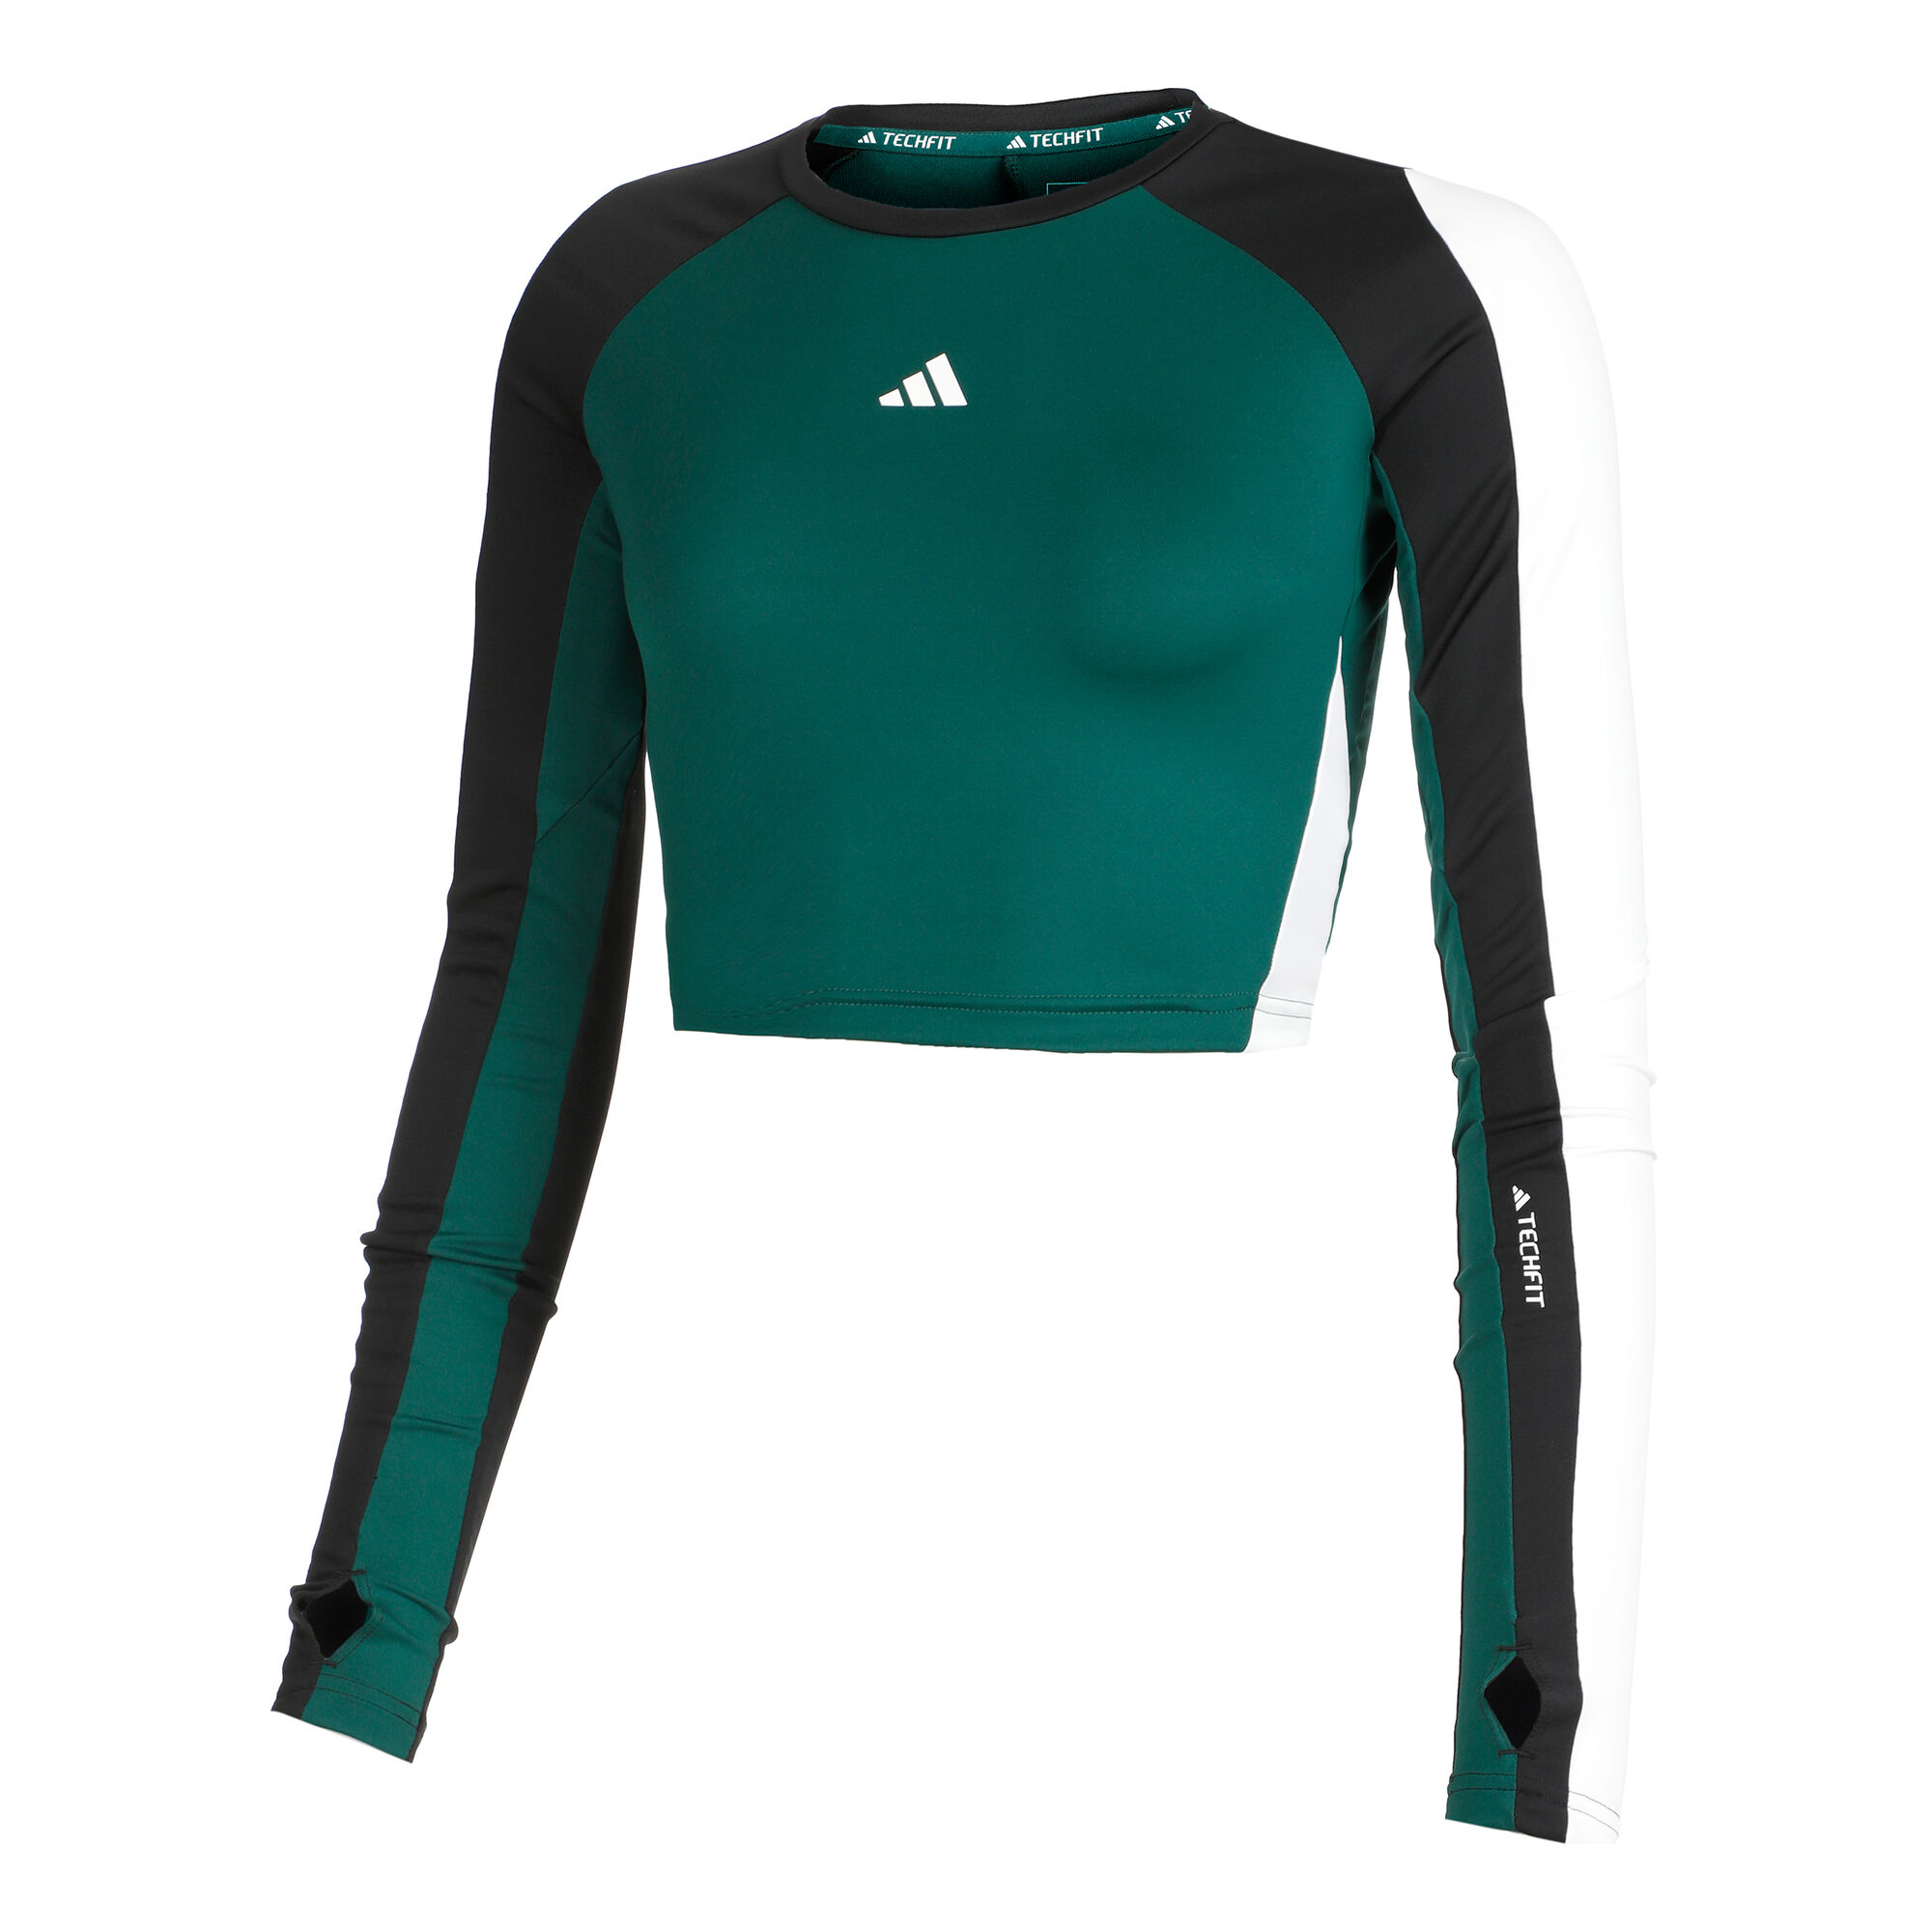 adidas Techfit Compression Top Women's Blue Used L